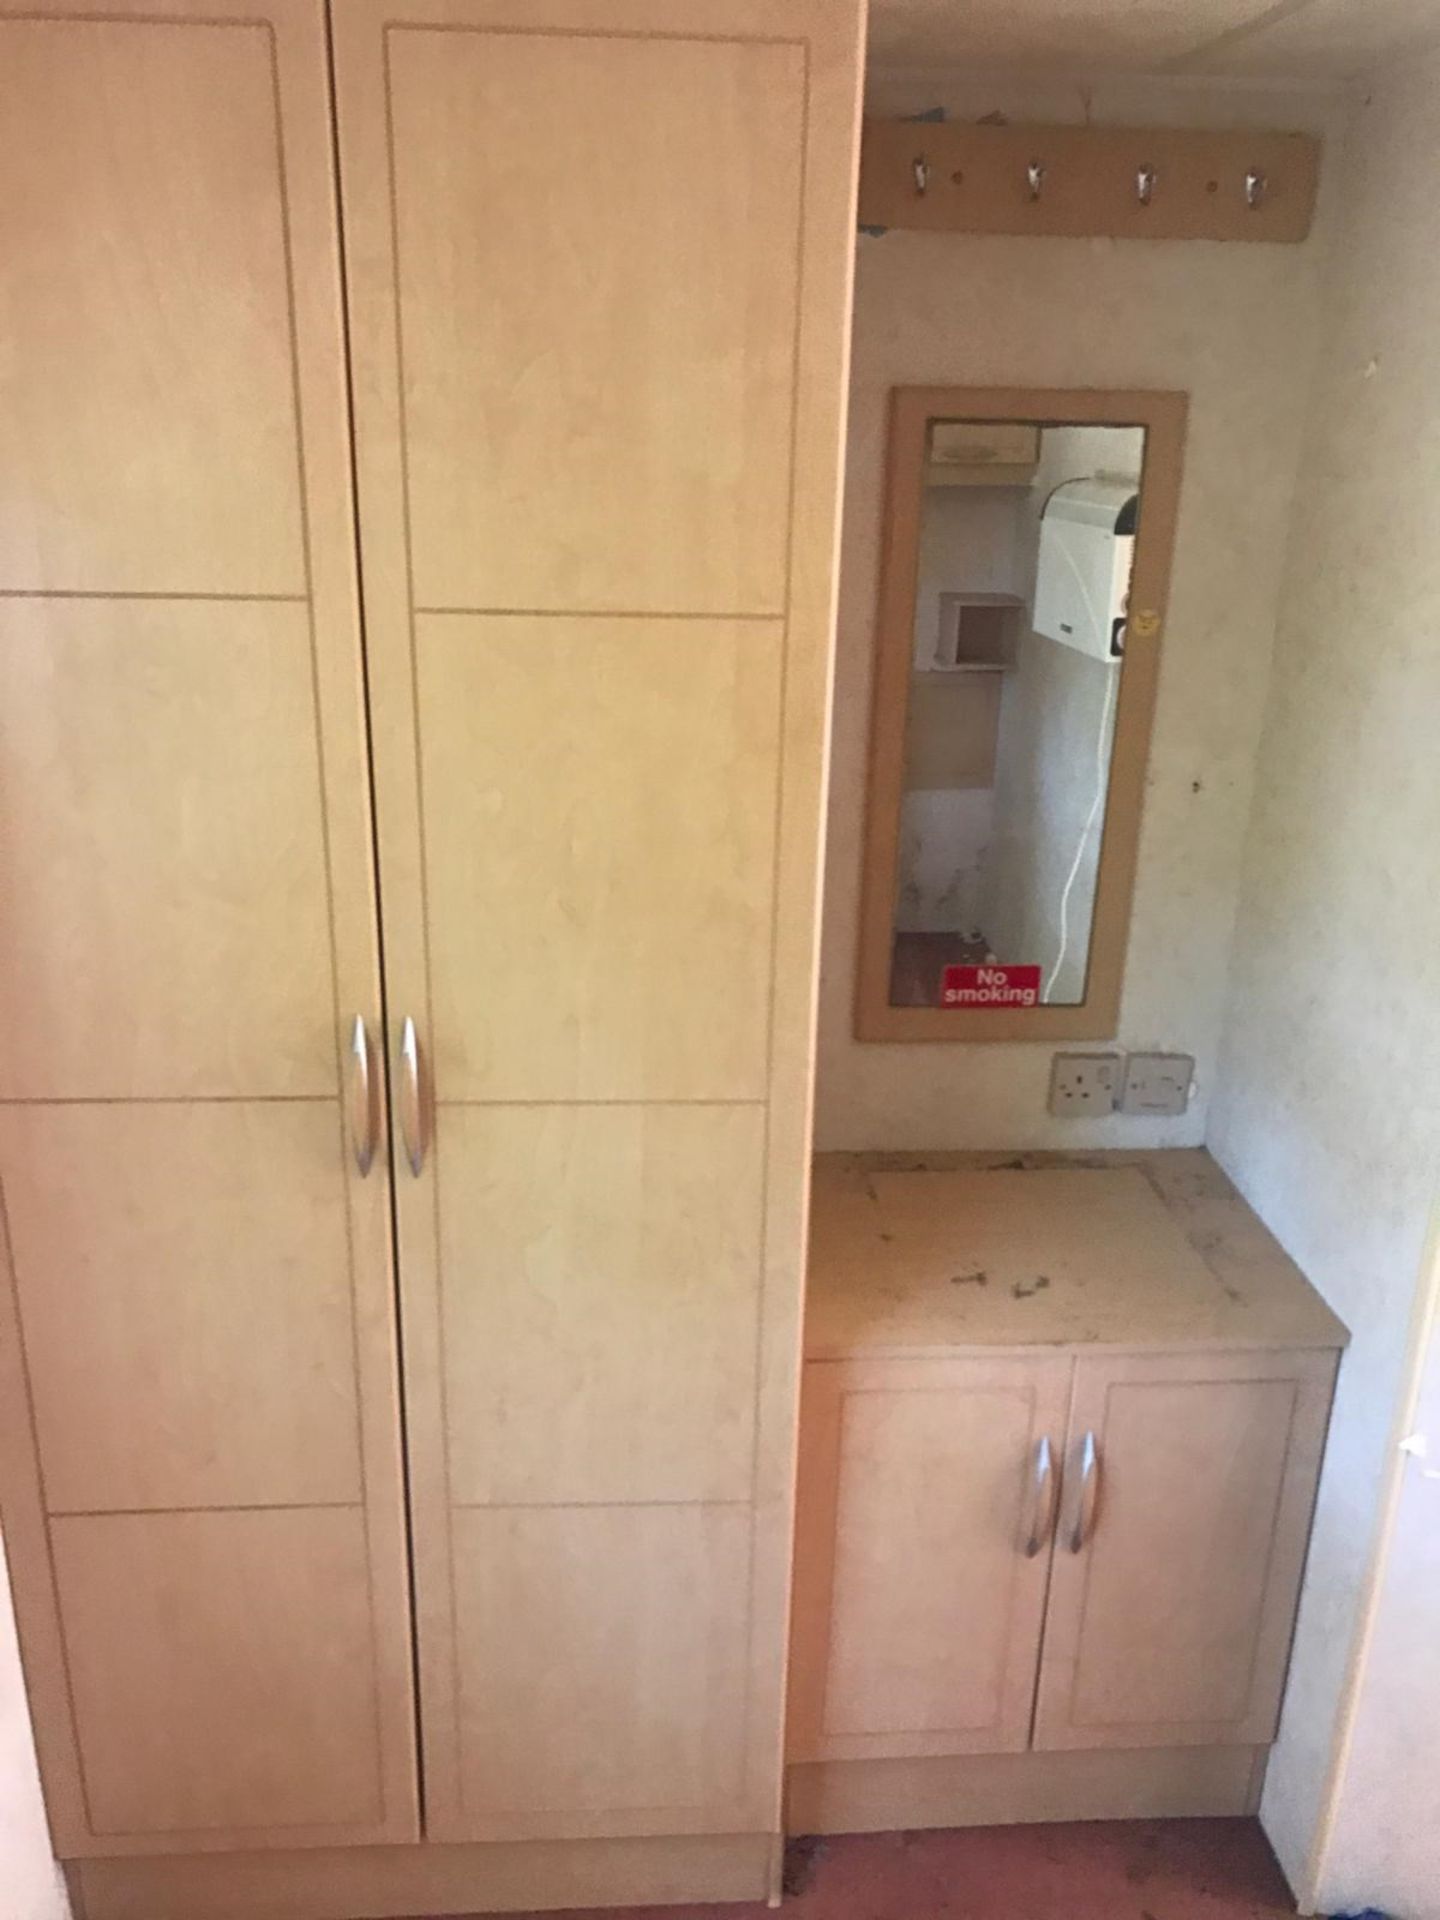 GOOD STATIC CARAVAN / MOBILE HOME - TO BE REMOVED WITHIN 5 DAYS, NO RESERVE! *NO VAT* - Image 2 of 18